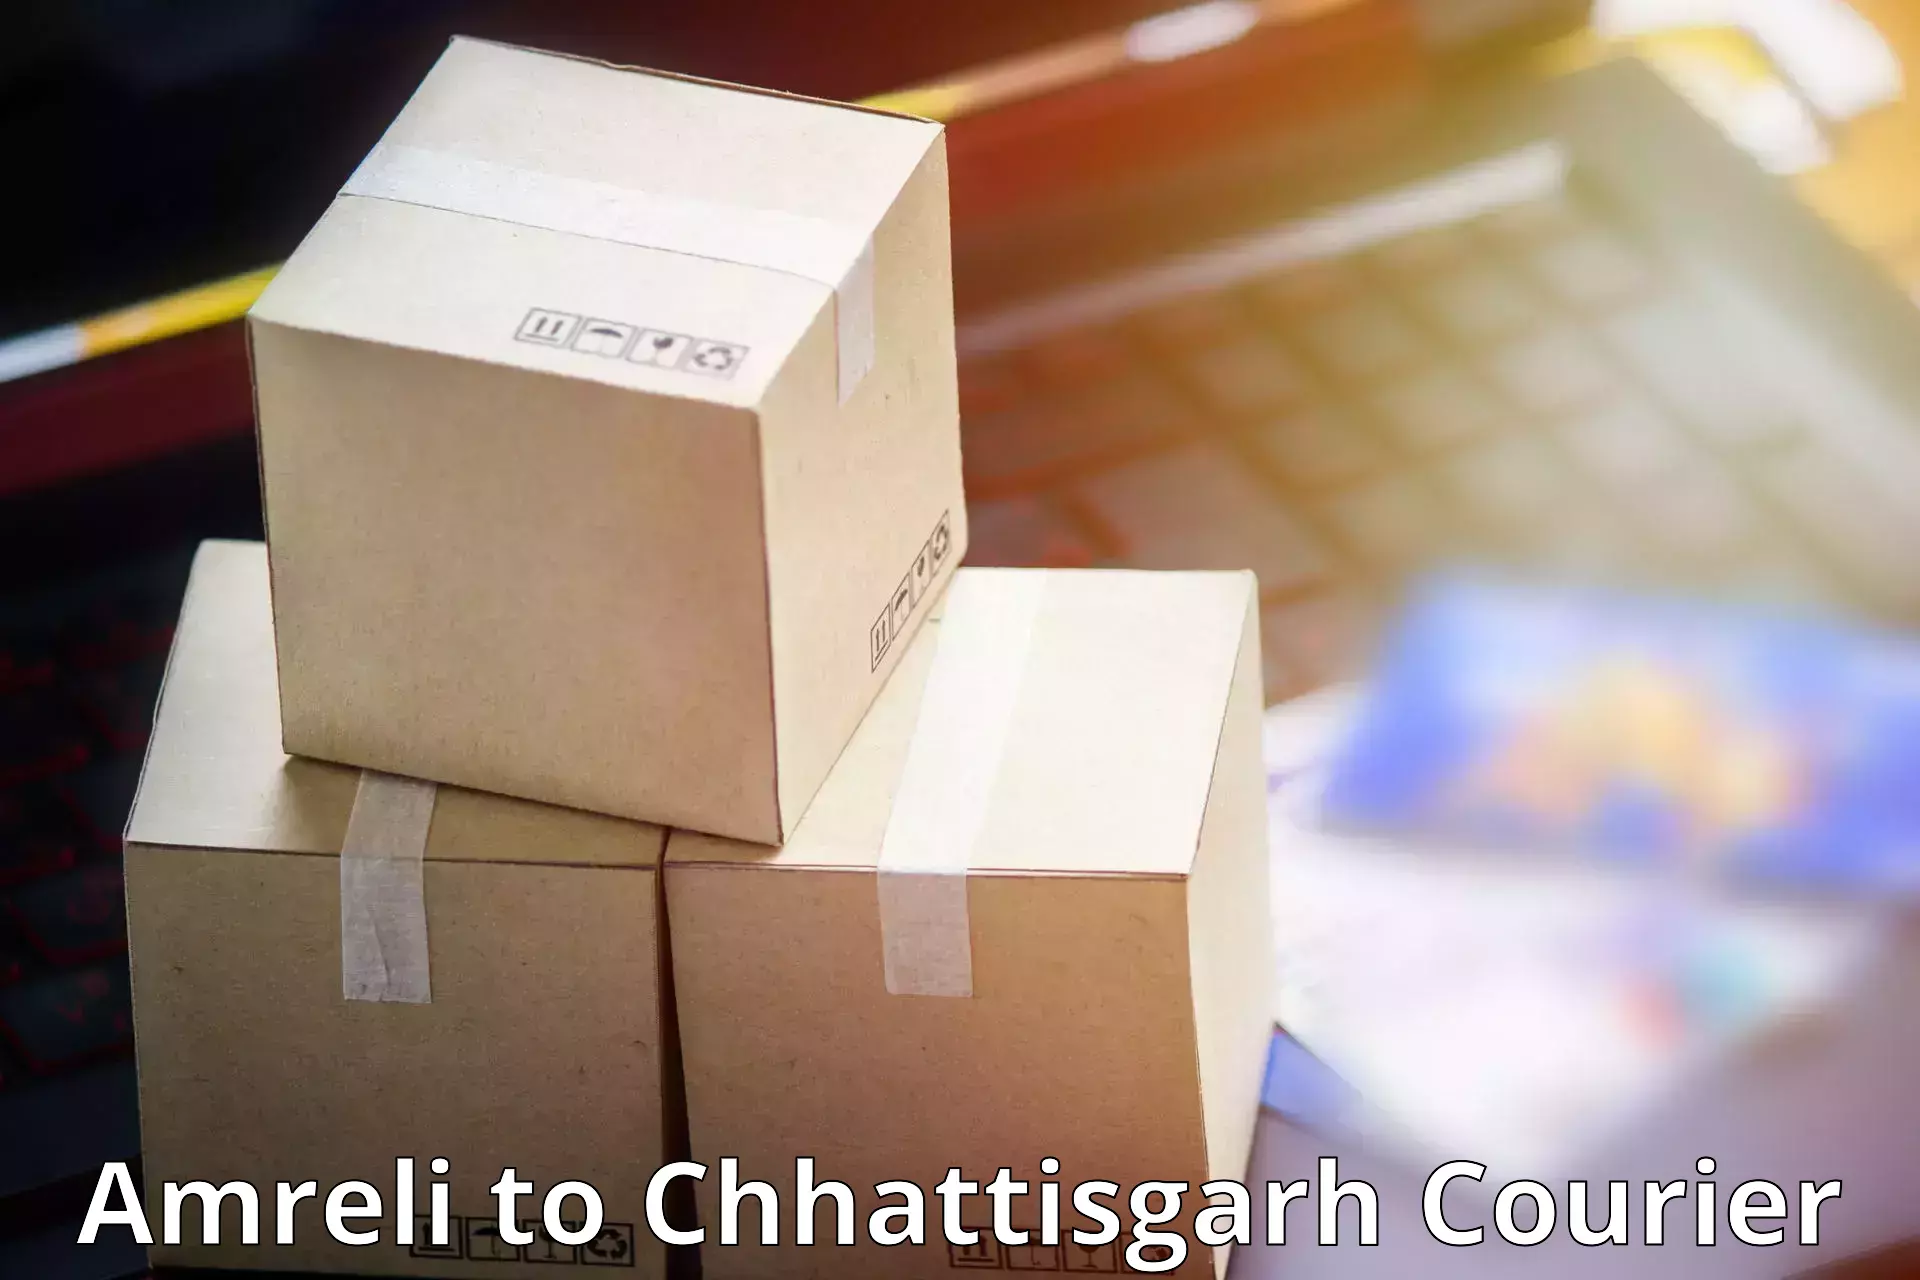 State-of-the-art courier technology Amreli to bagbahra